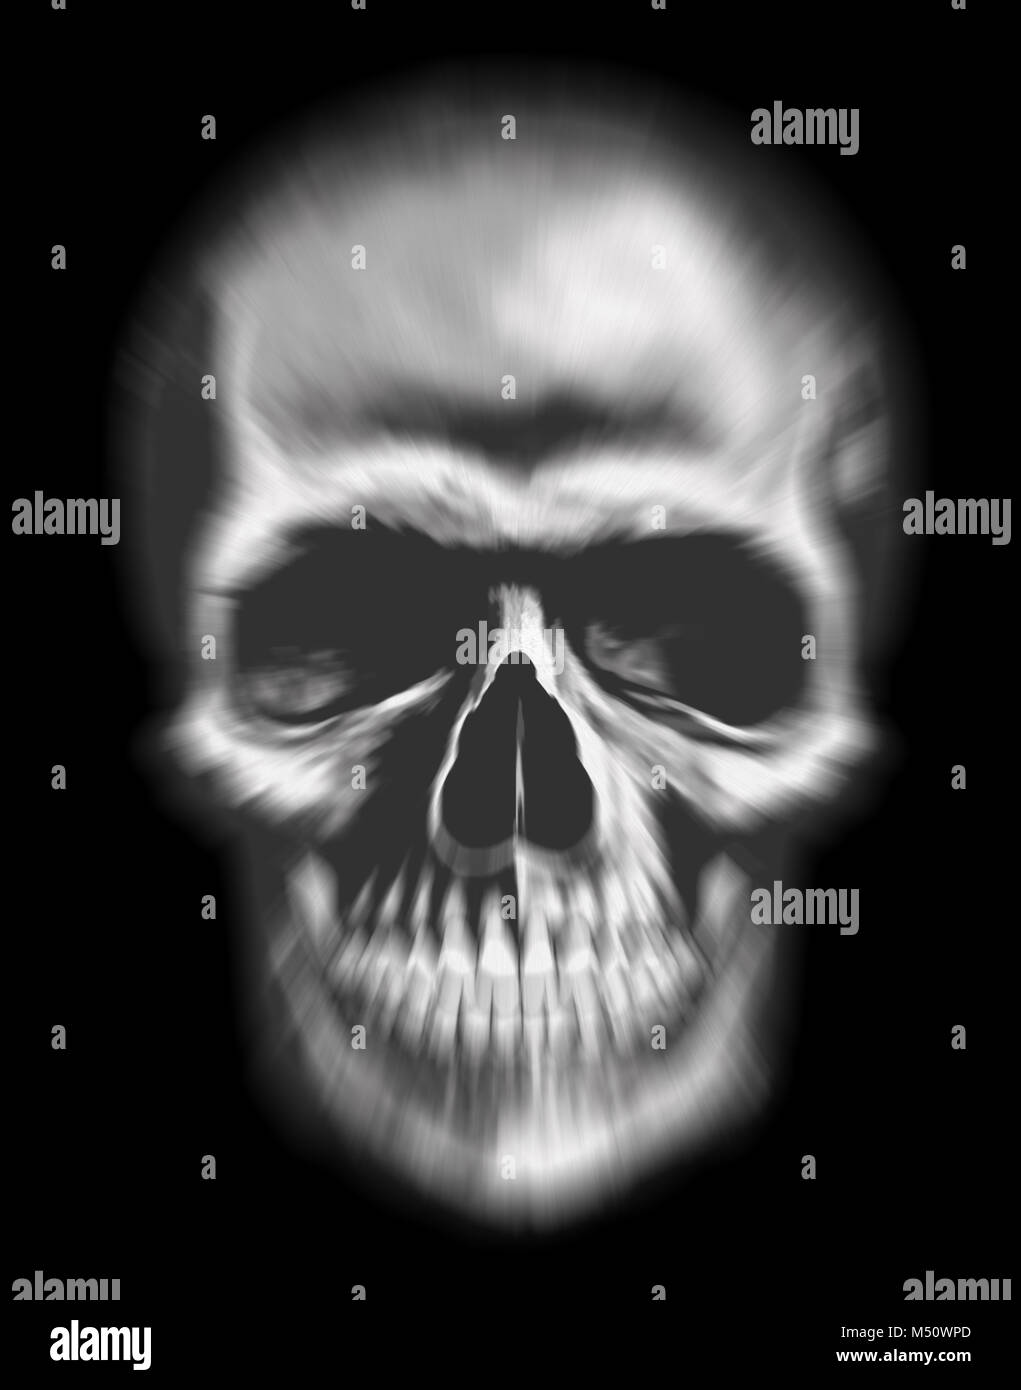 ghost face, blurred human skull as symbol of fear and death with black background Stock Photo